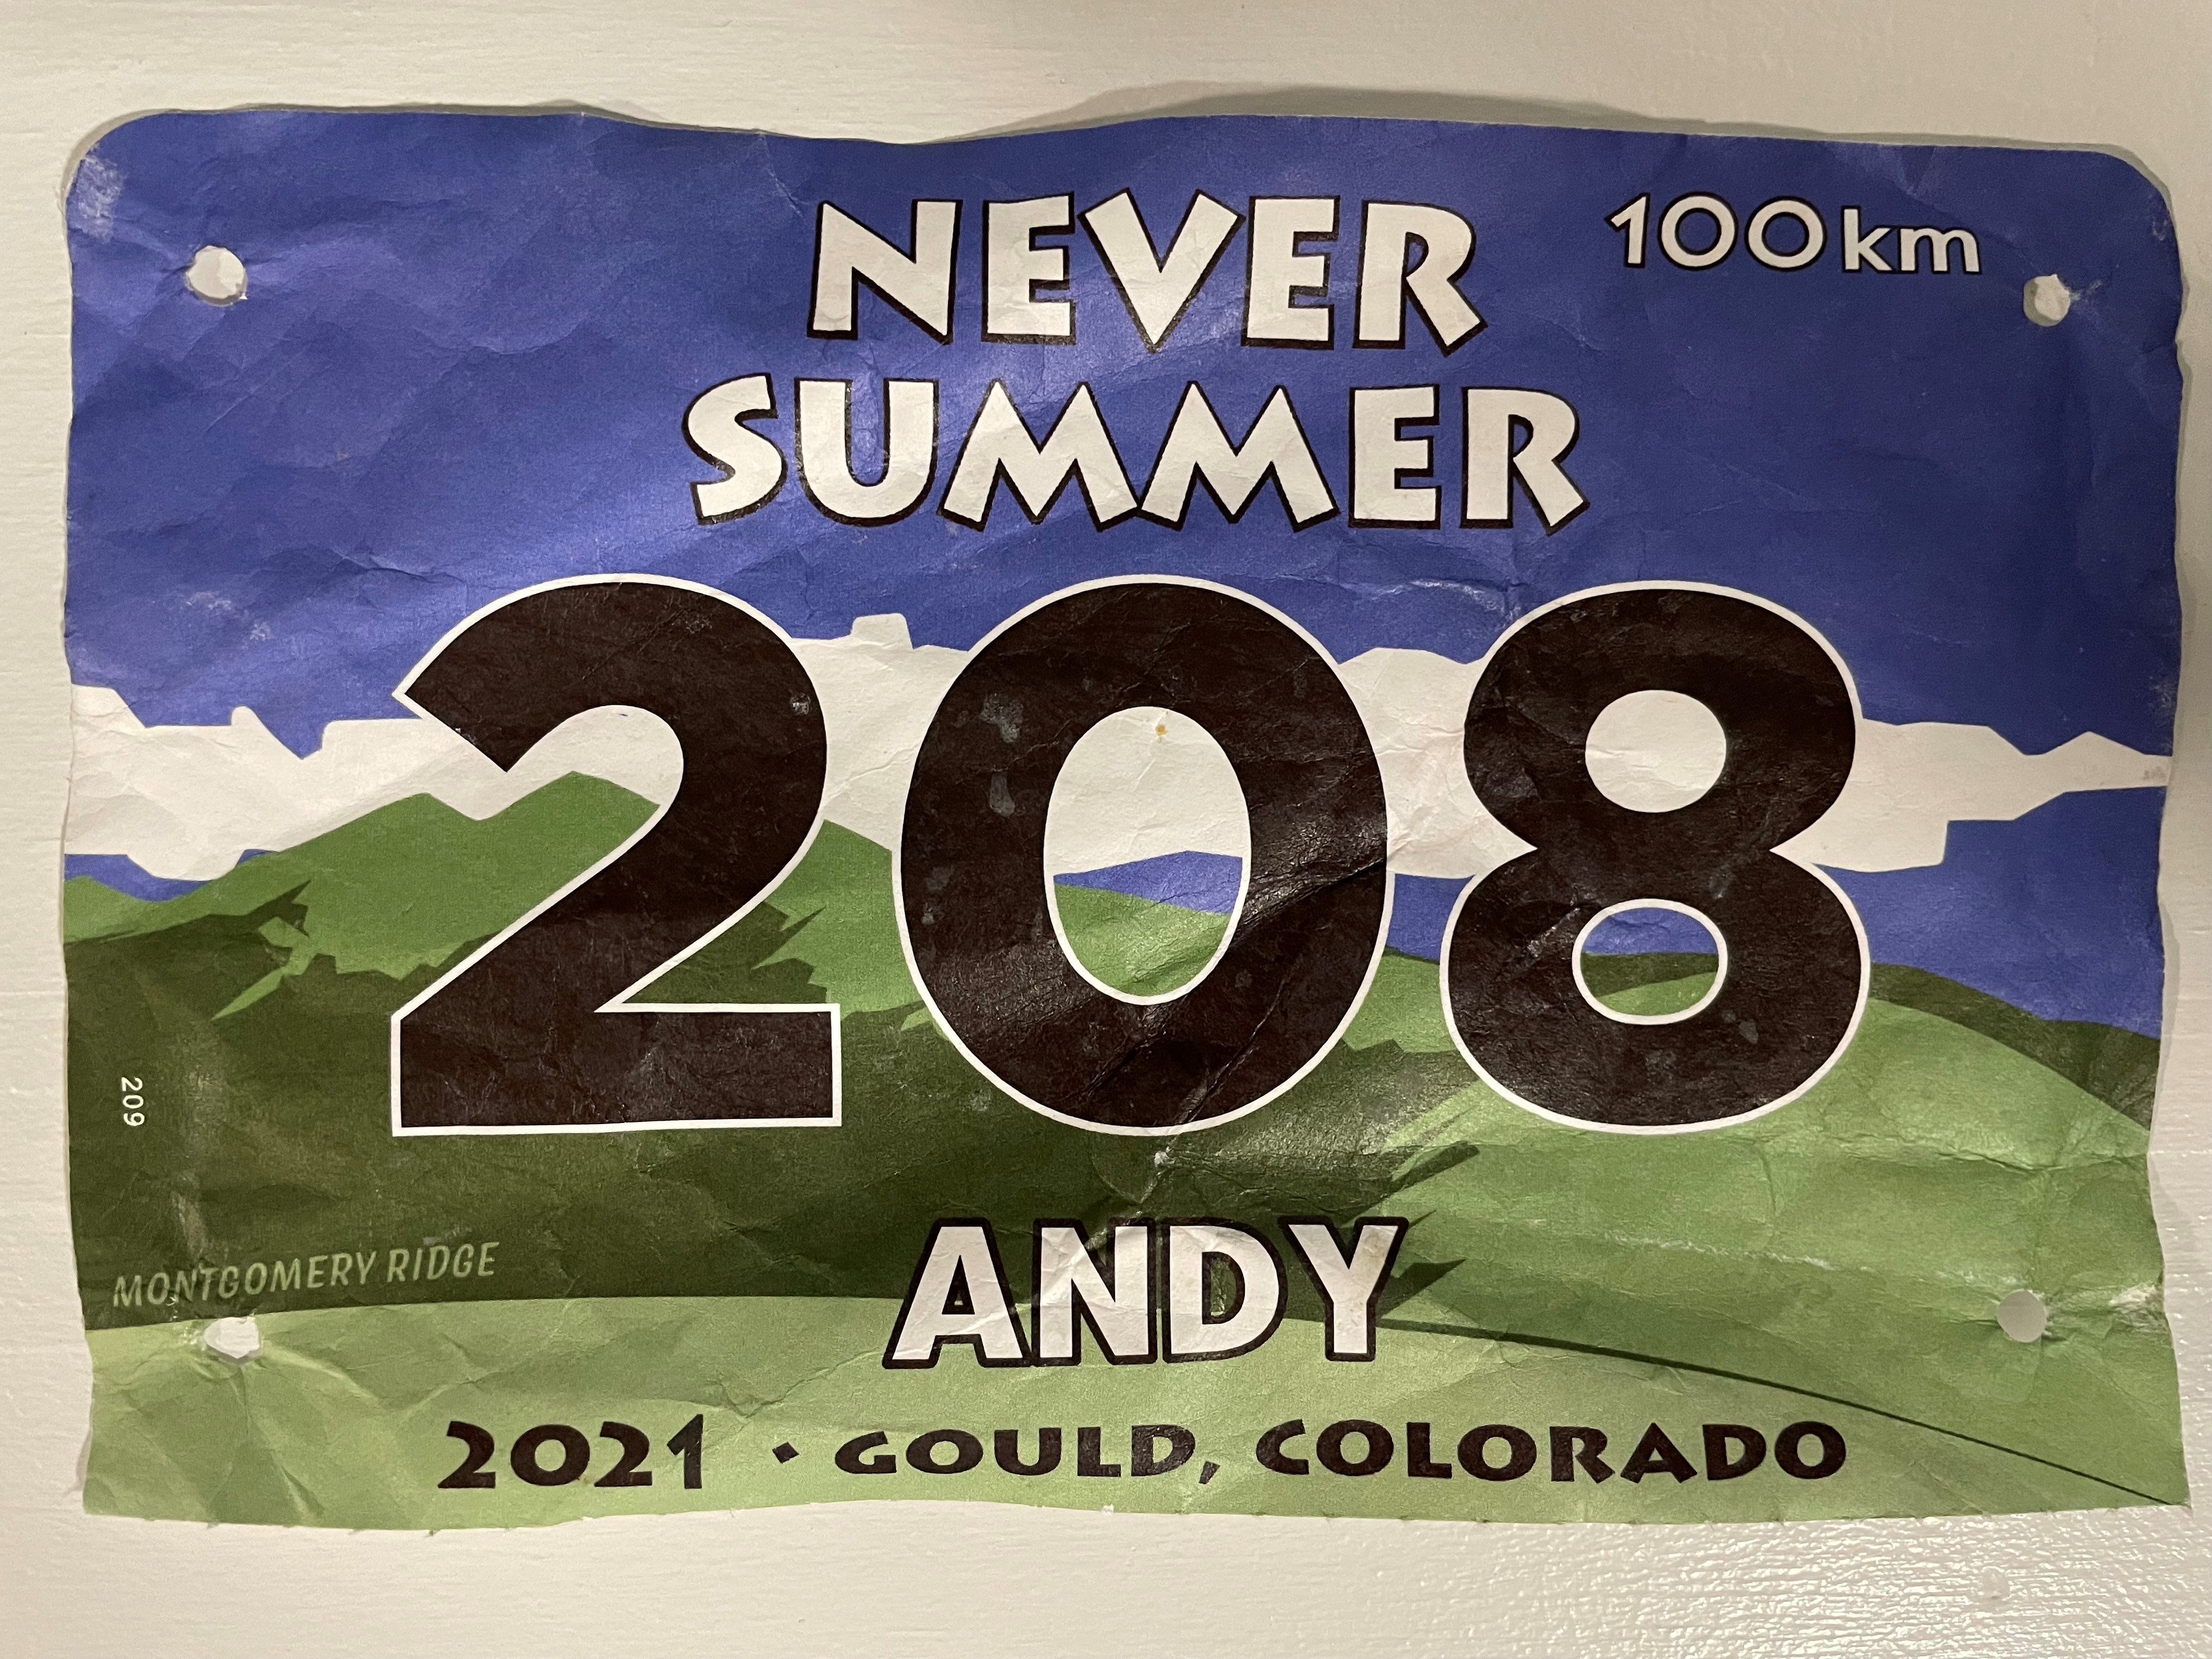 Andy's "Never Summer" race tag. He was entry 208.